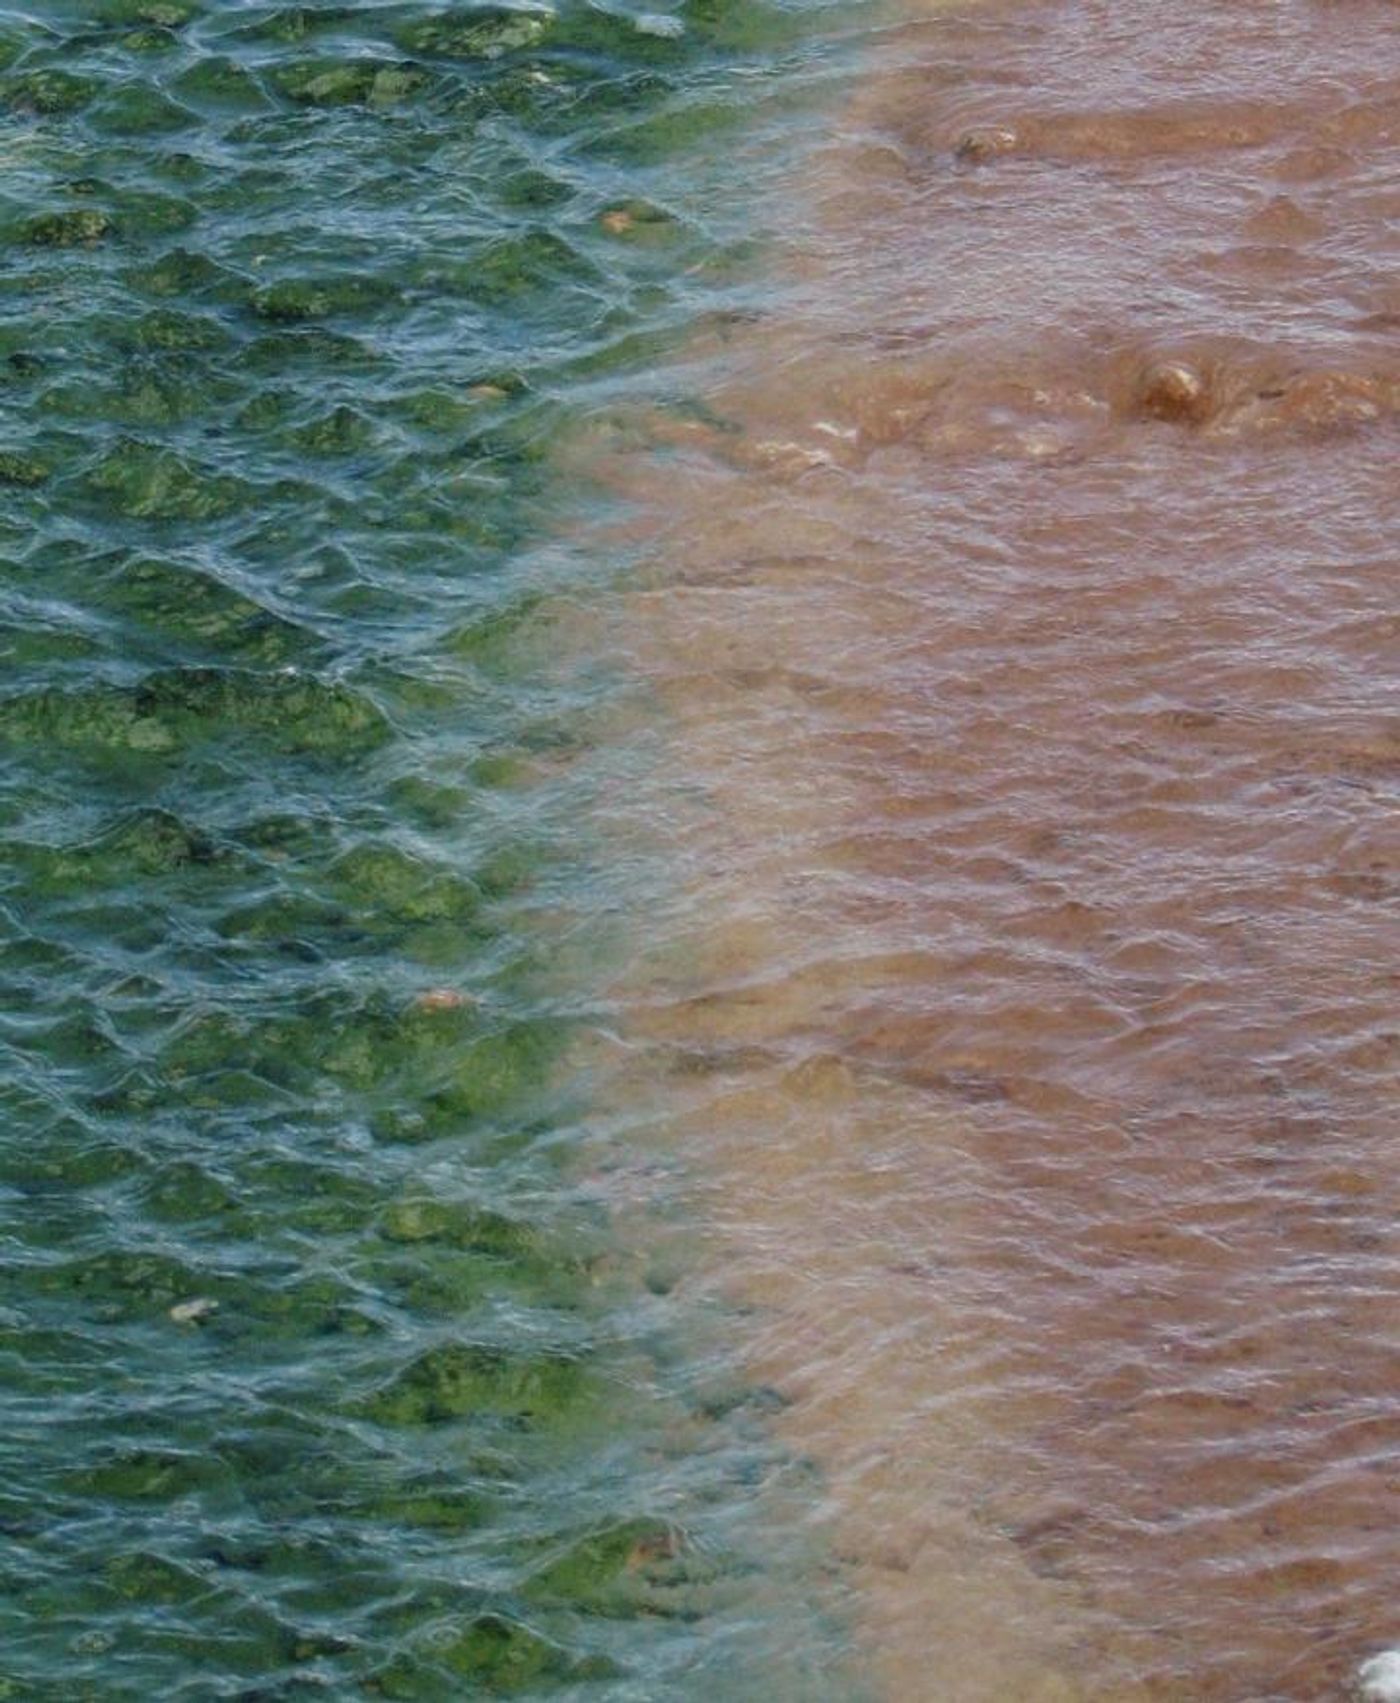 Cyanidiales species of red algae, which appear green in this photo because chlorophyll masks their red pigment, growing in a hot spring at Yellowstone National Park. / Credit: Debashish Bhattacharya/Rutgers University-New Brunswick